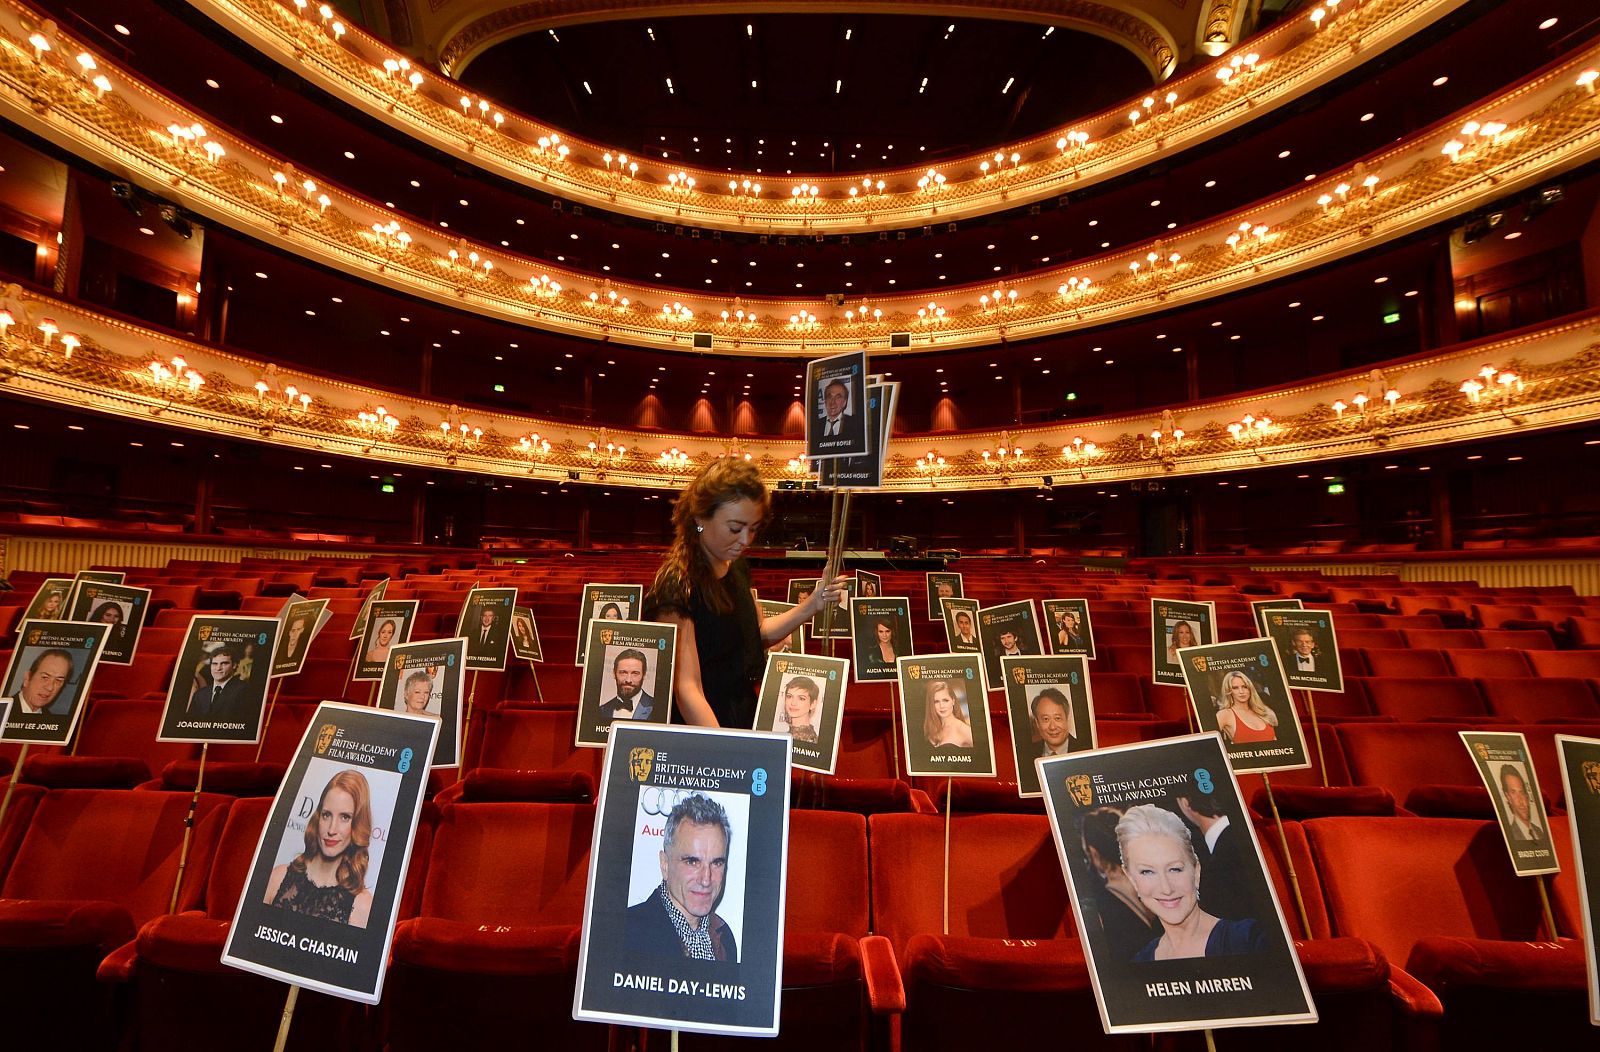 Production staff member Rosie Wiseman places position markers representing guests ahead of the BAFTA awards at the Royal Opera House in central London